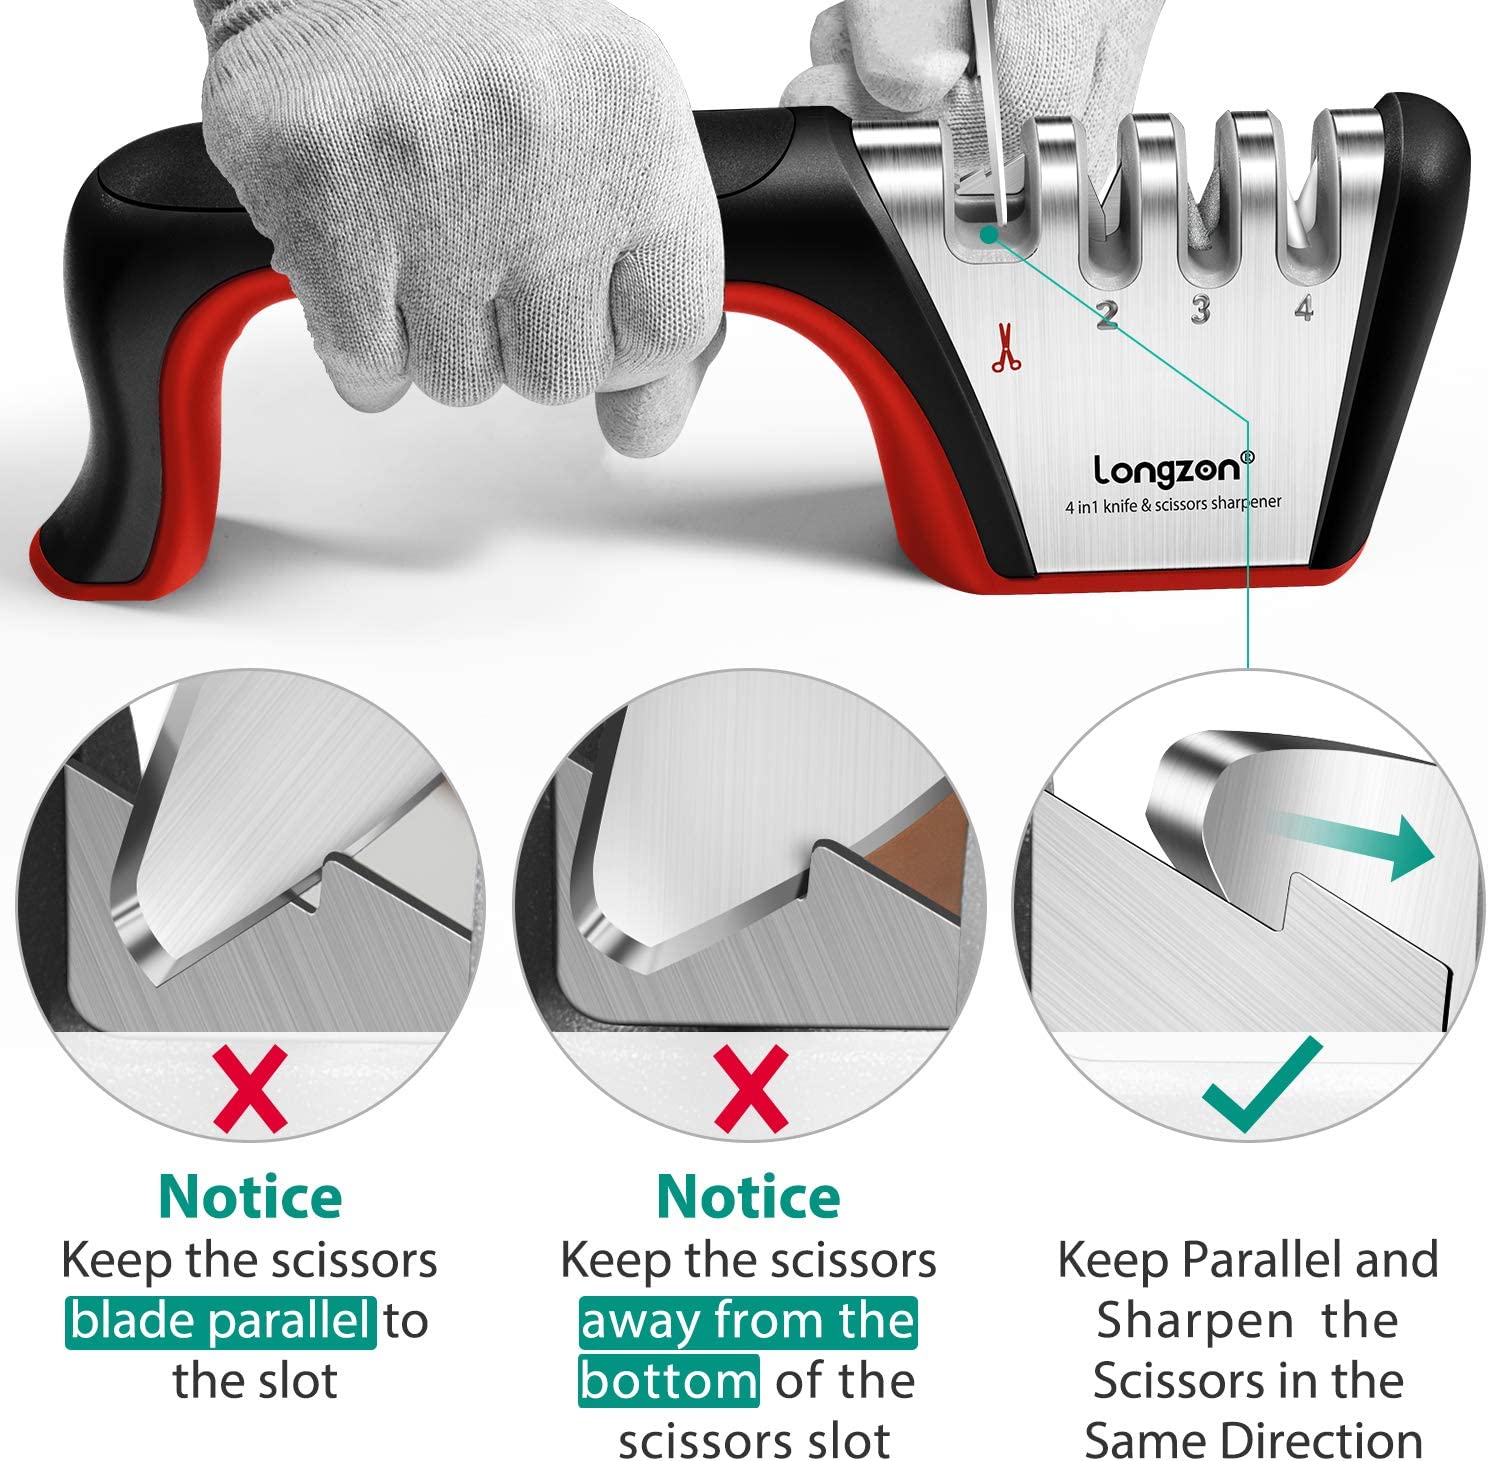 4-in-1 longzon [4 stage] Knife Sharpener with a Pair of Cut-Resistant Glove